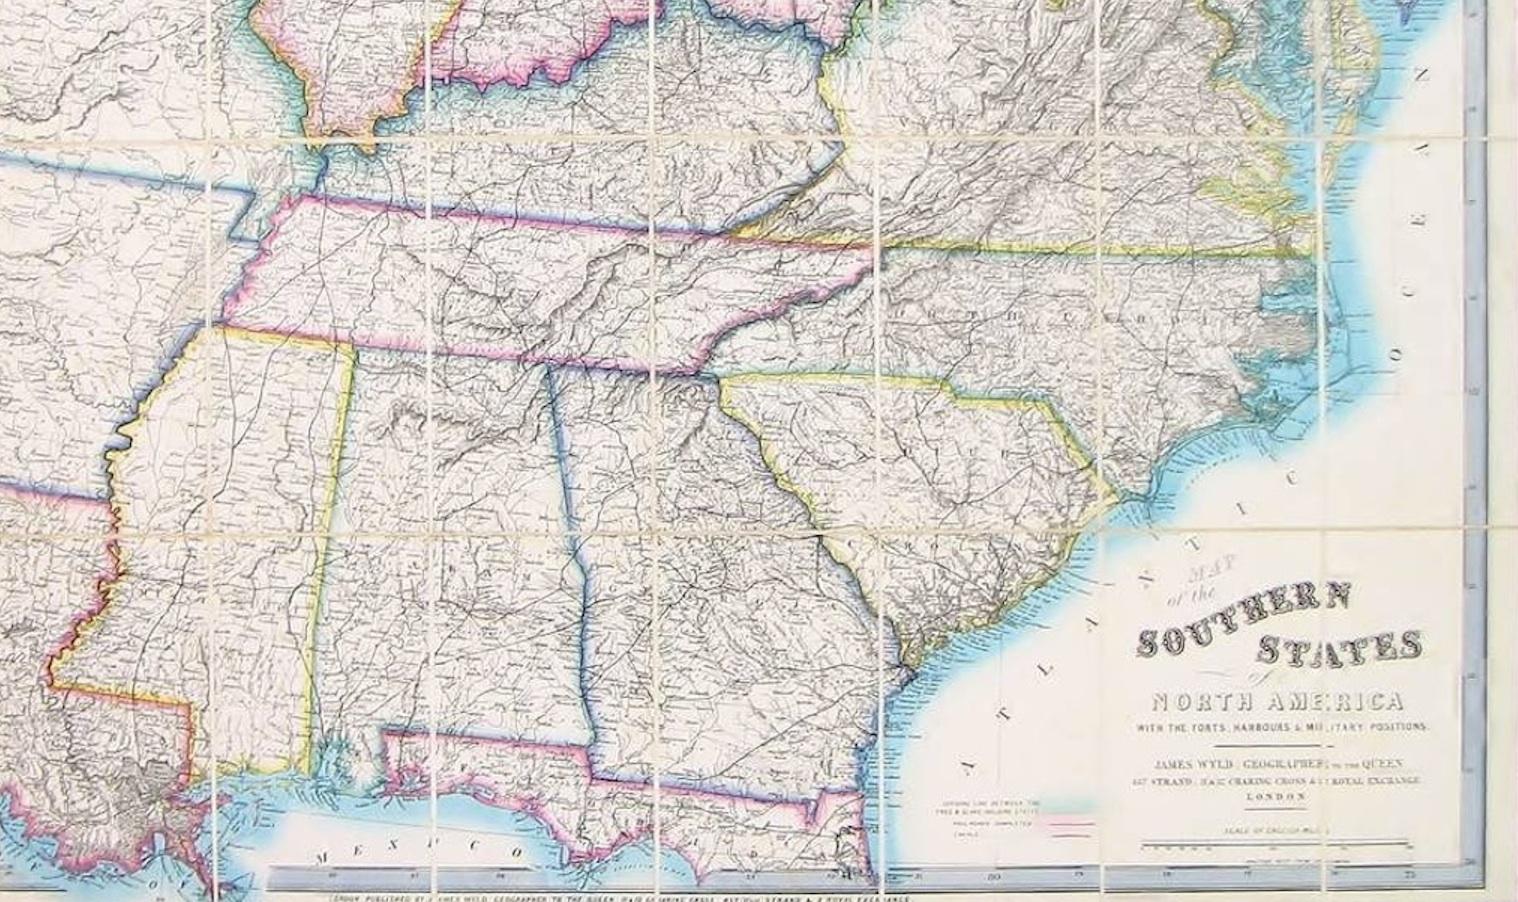 1861 hand-colored map of the Southern States of North America with the Forts, Harbours & Military Positions by James Wyld.

This important map indicates the dividing line between the Union and Confederate states. The map covers the area from Long